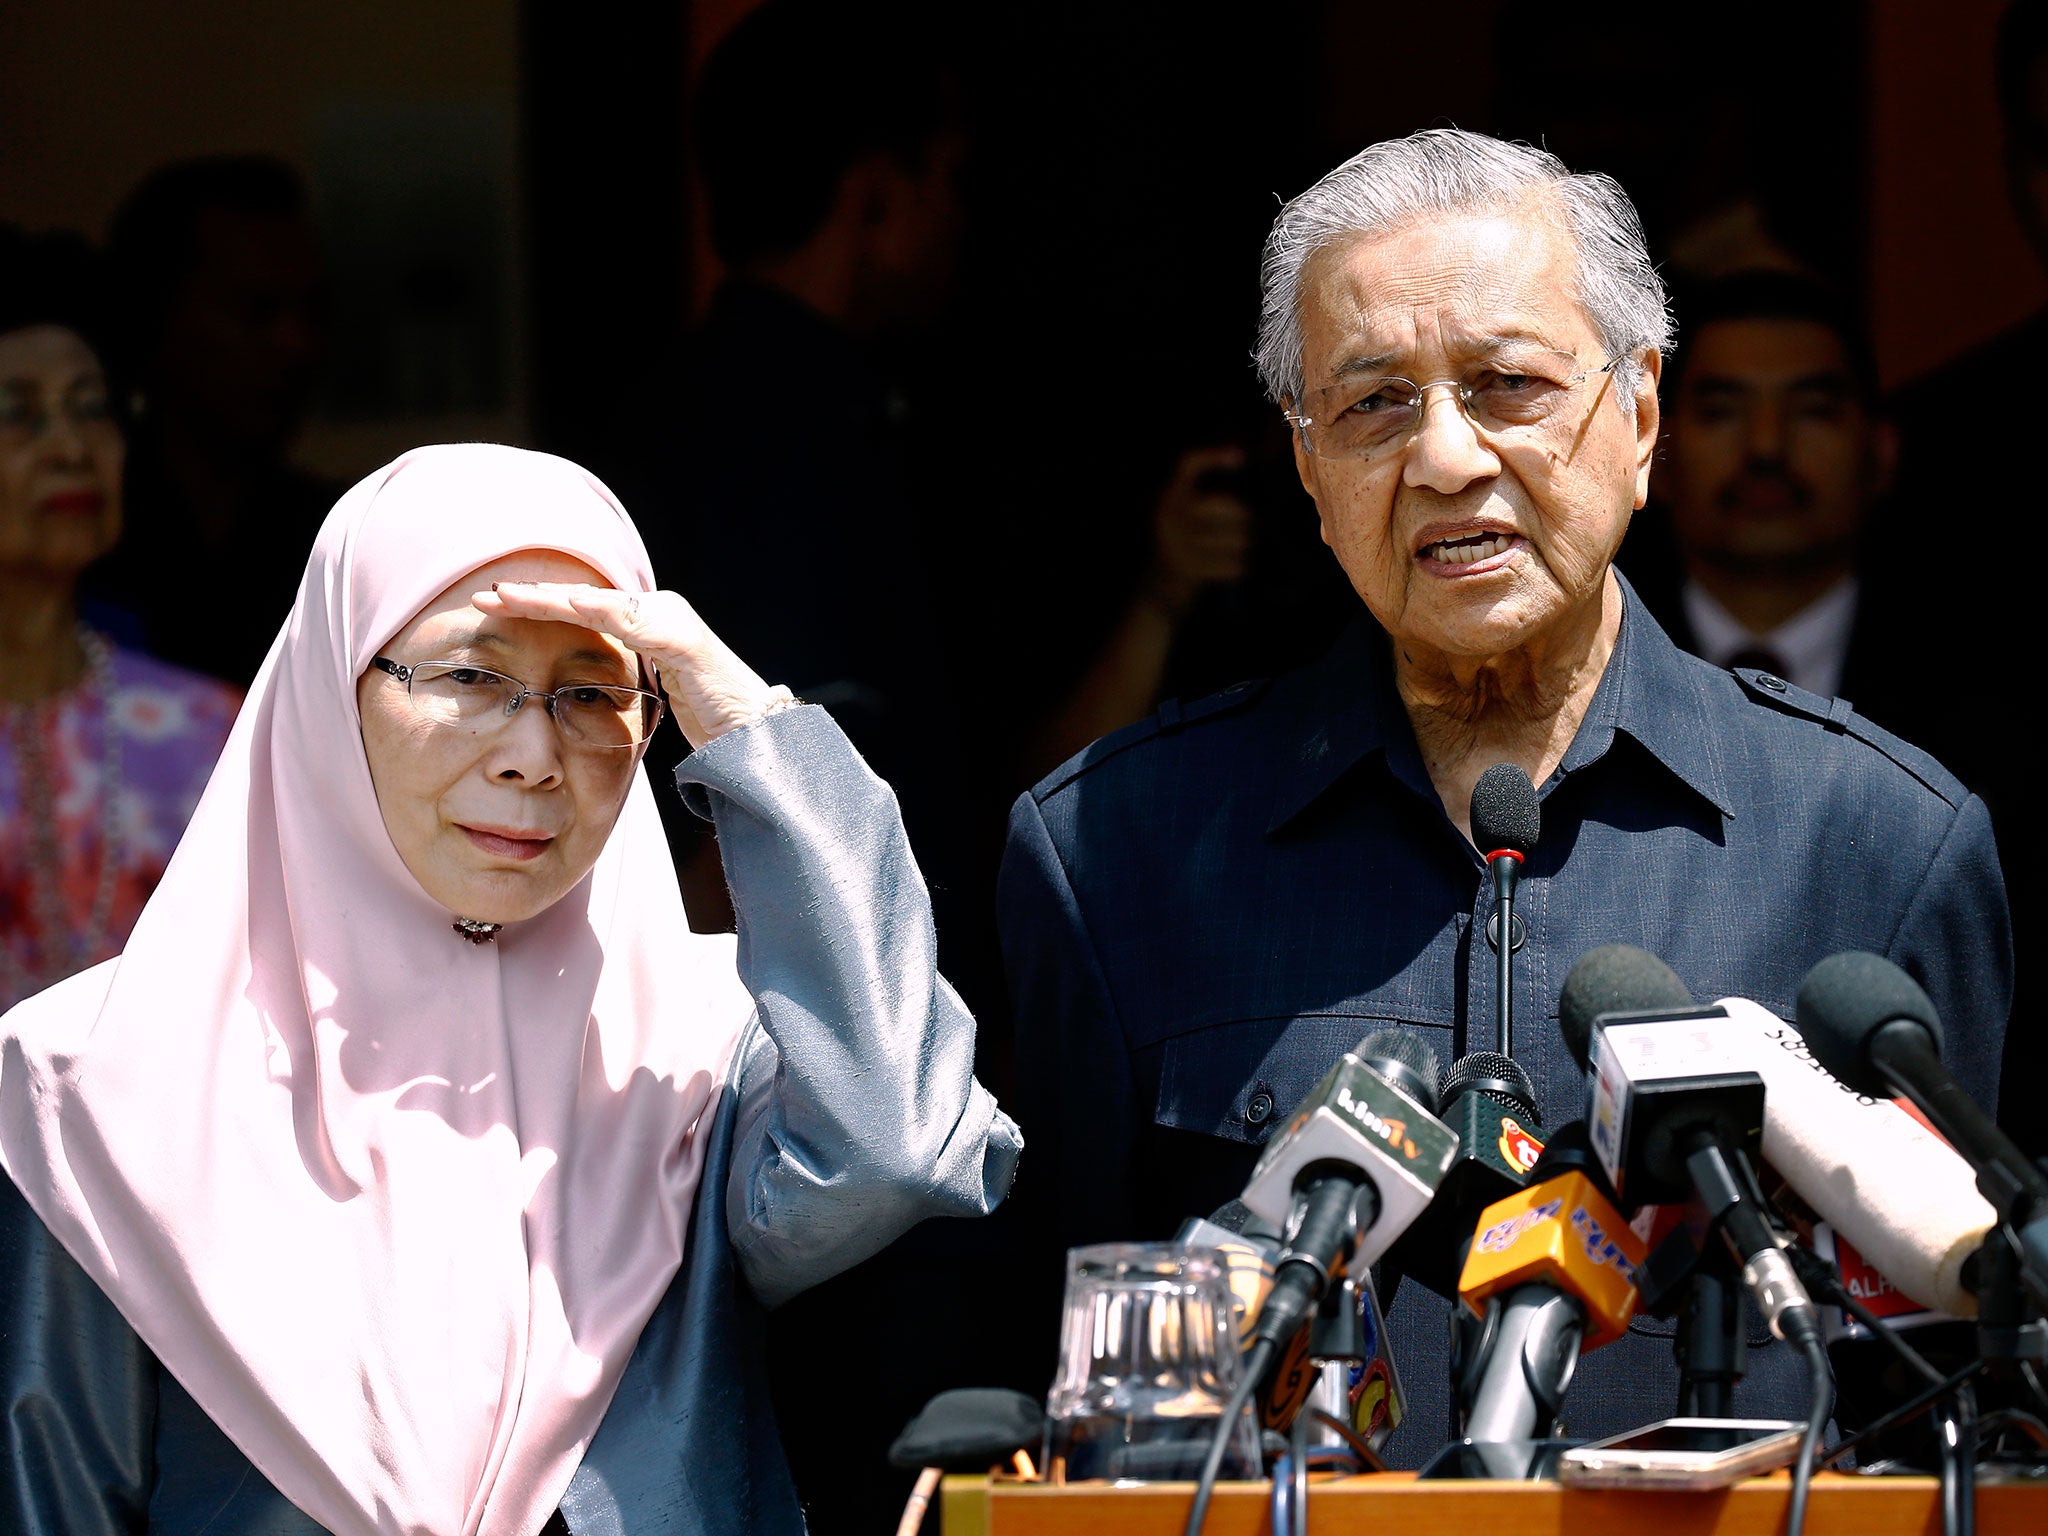 Malaysia's Prime Minister Mahathir Mohamad, right, speaks next to President of Justice Party Wan Azizah, wife of Anwar Ibrahim